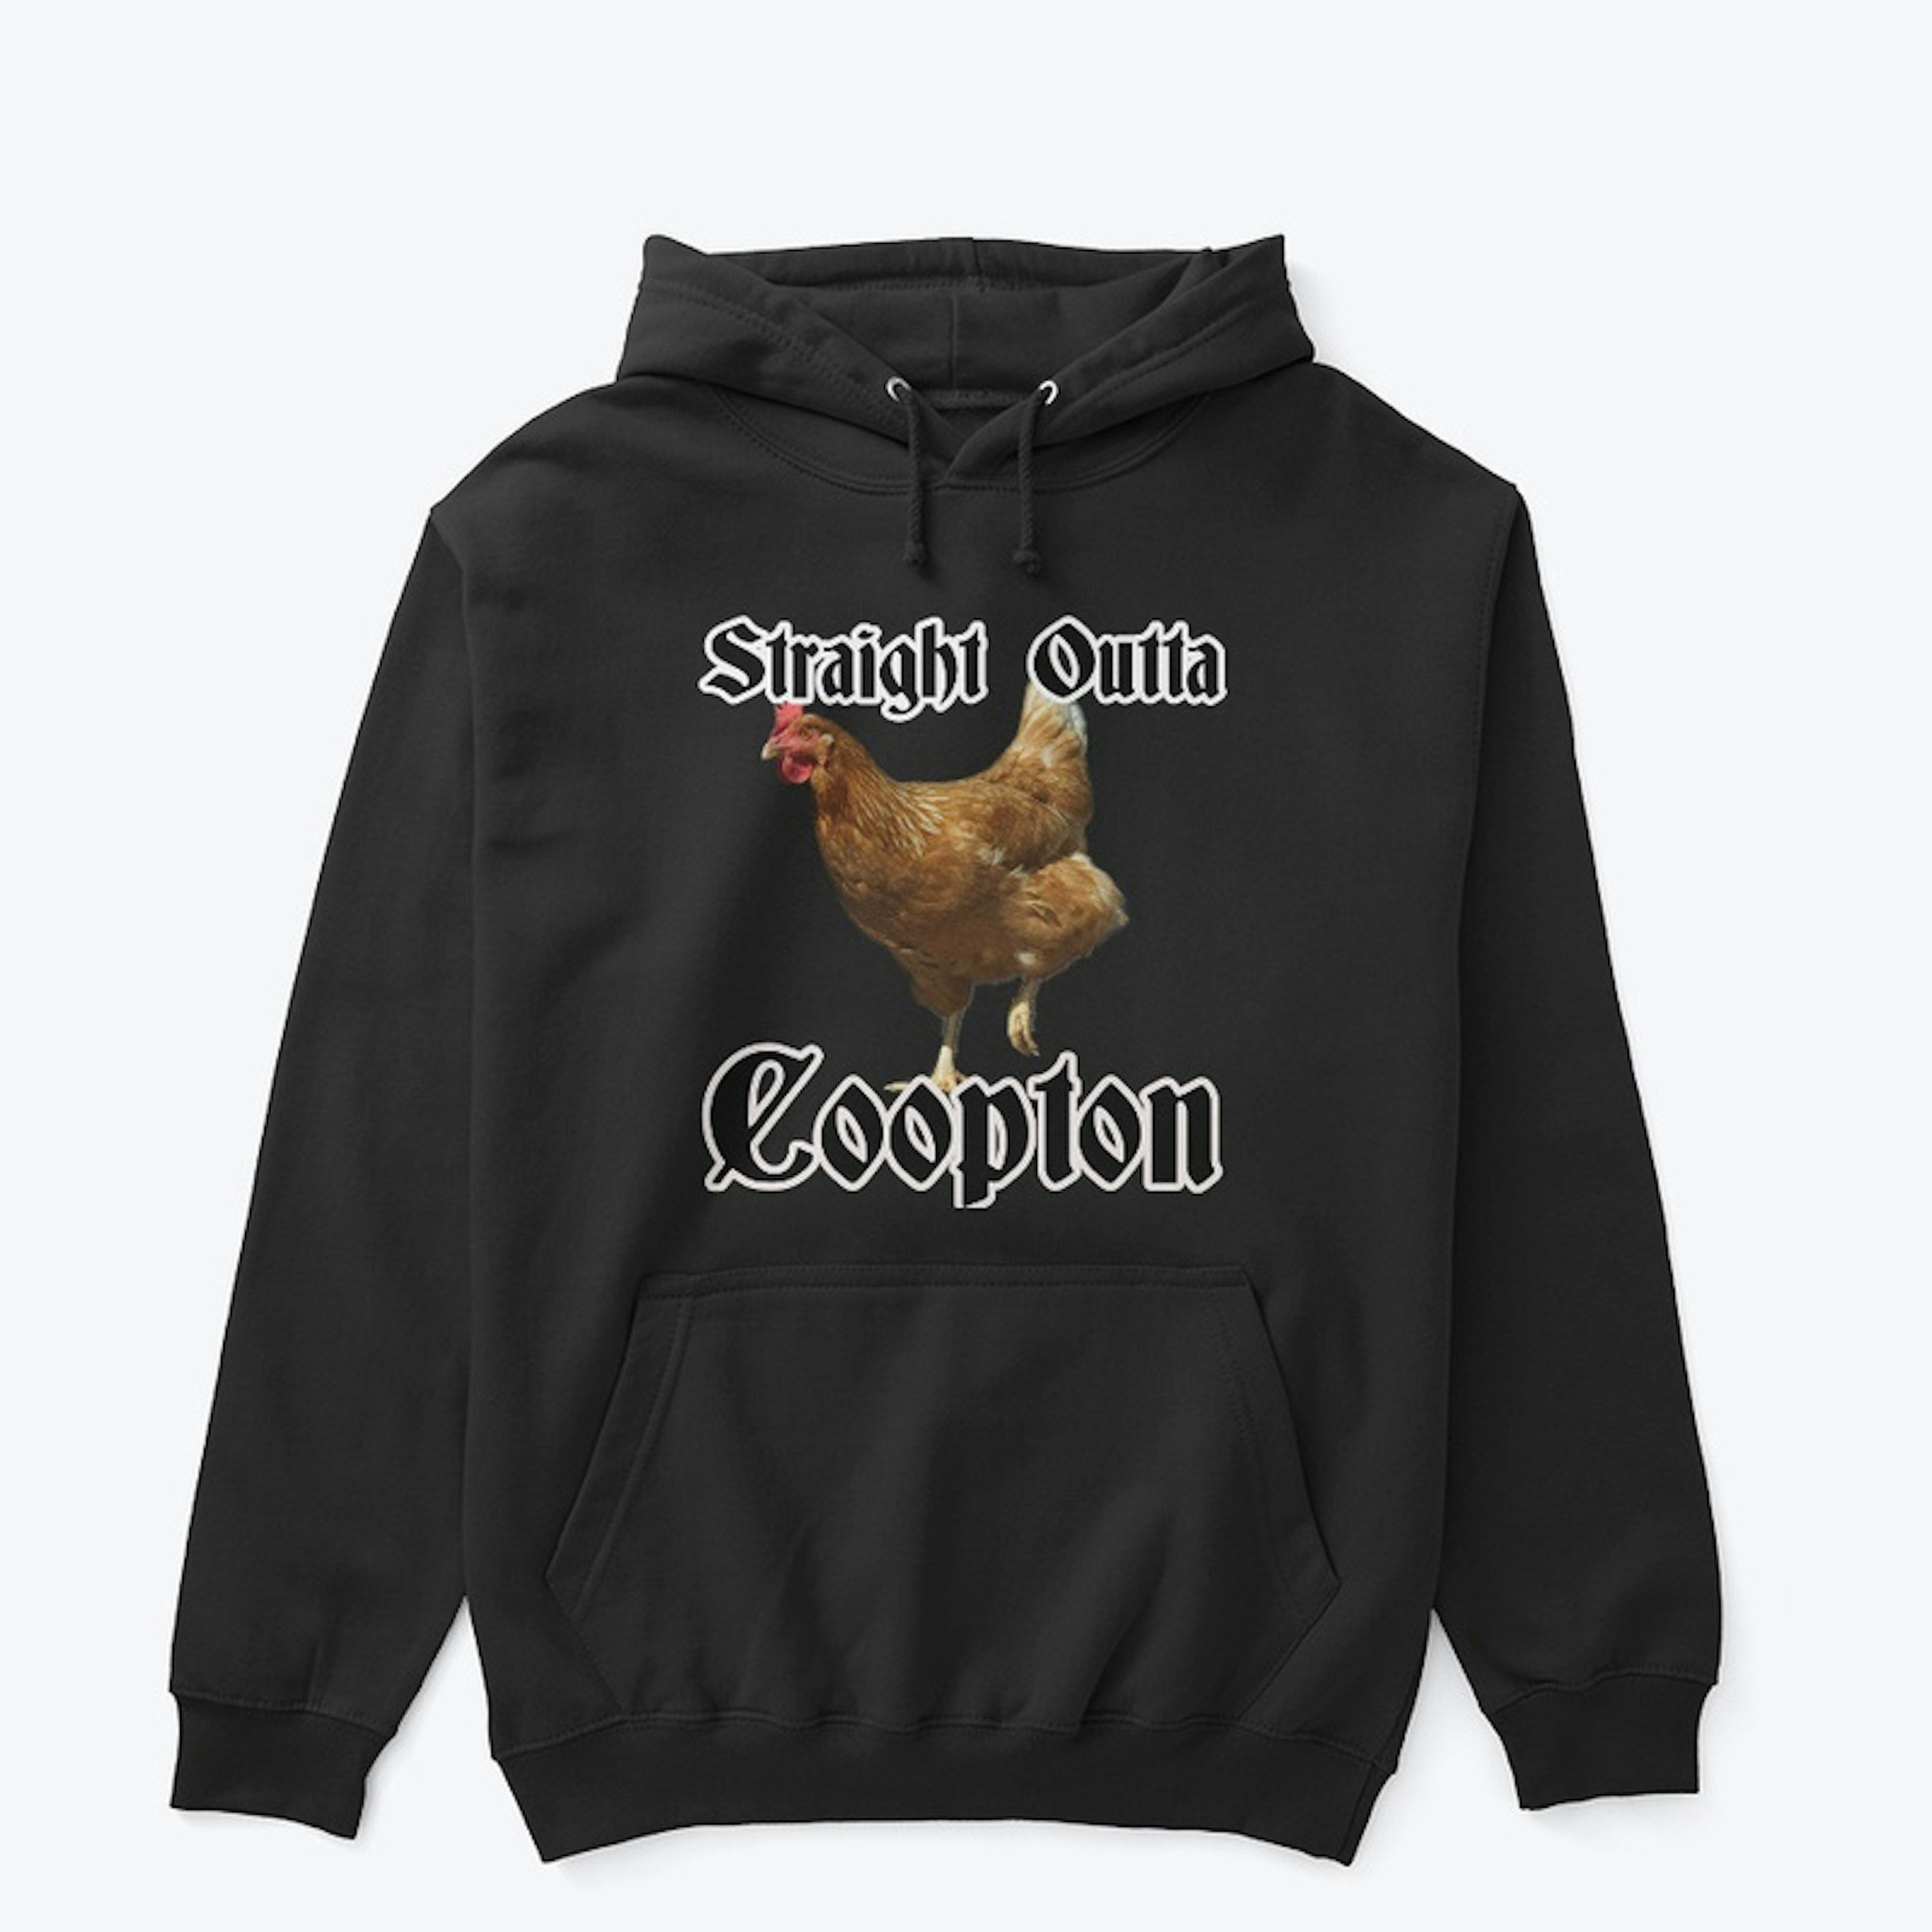 Straight outta Coopton HOODIE